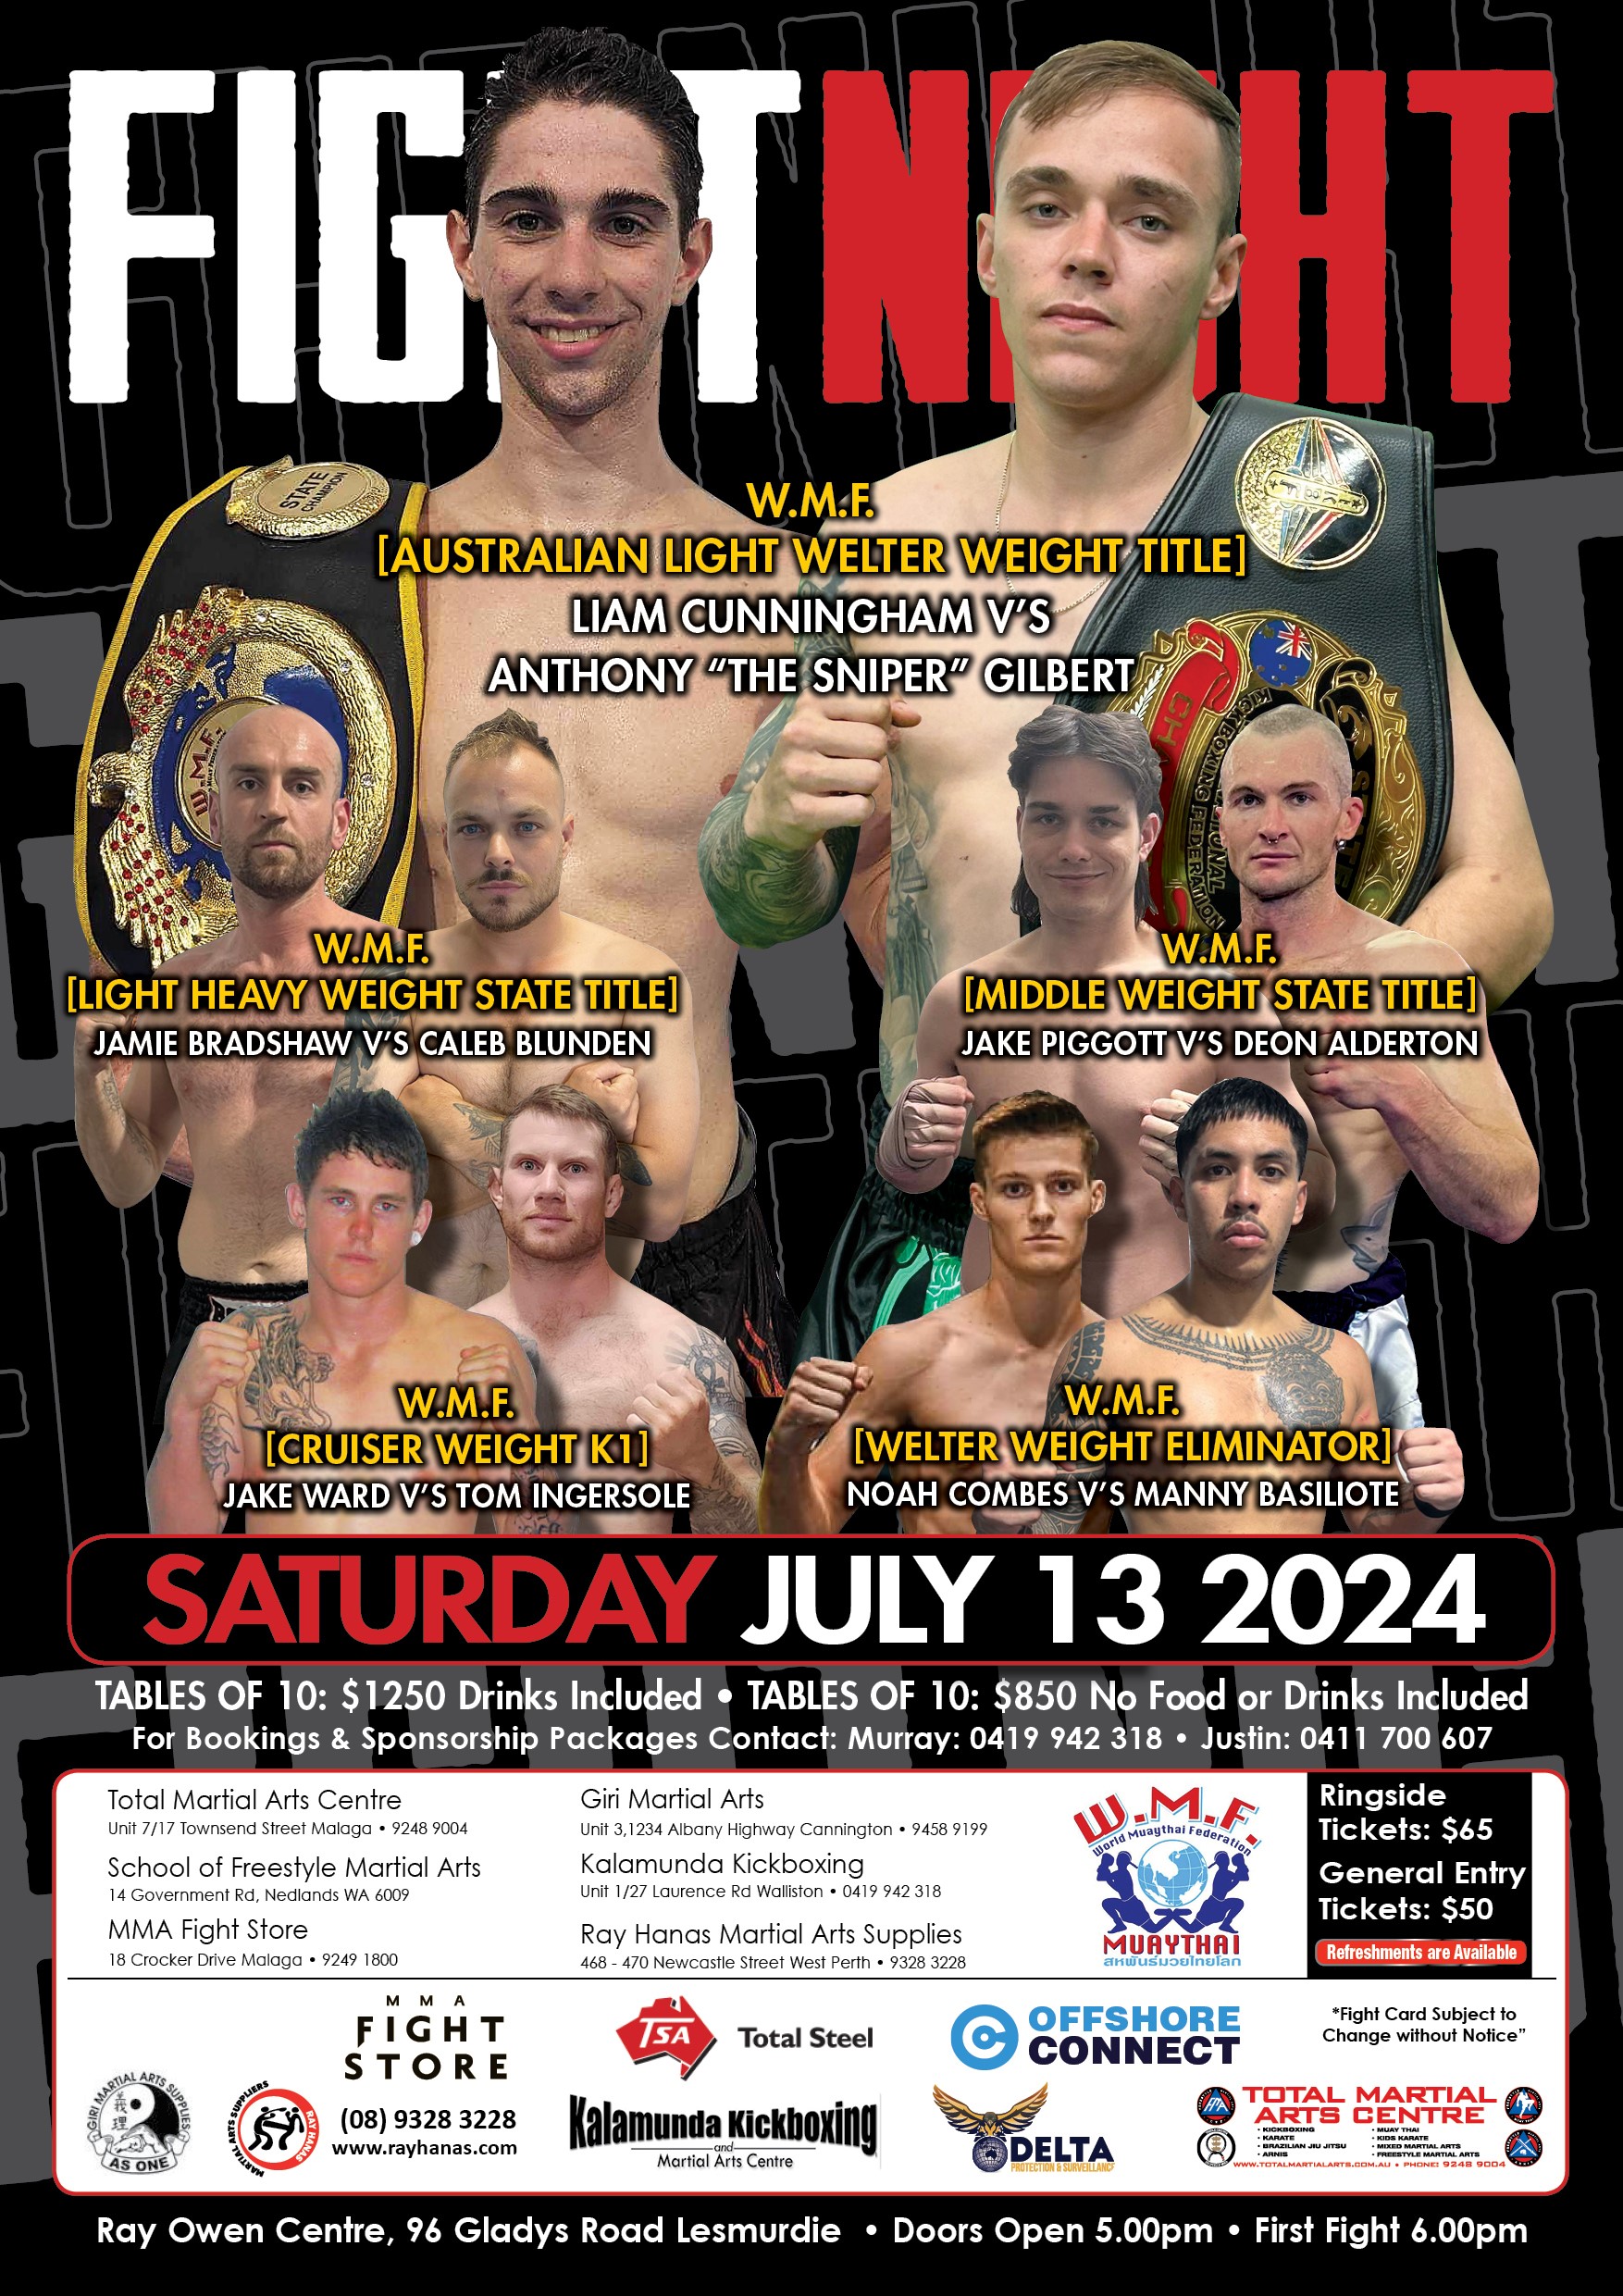 5 pairs of male fighters with fists clenched. Includes text: Fight Night 1 3 July 2024. Ray Owen Centre 96 Gladys Road Lesmurdie. Starts 6pm.